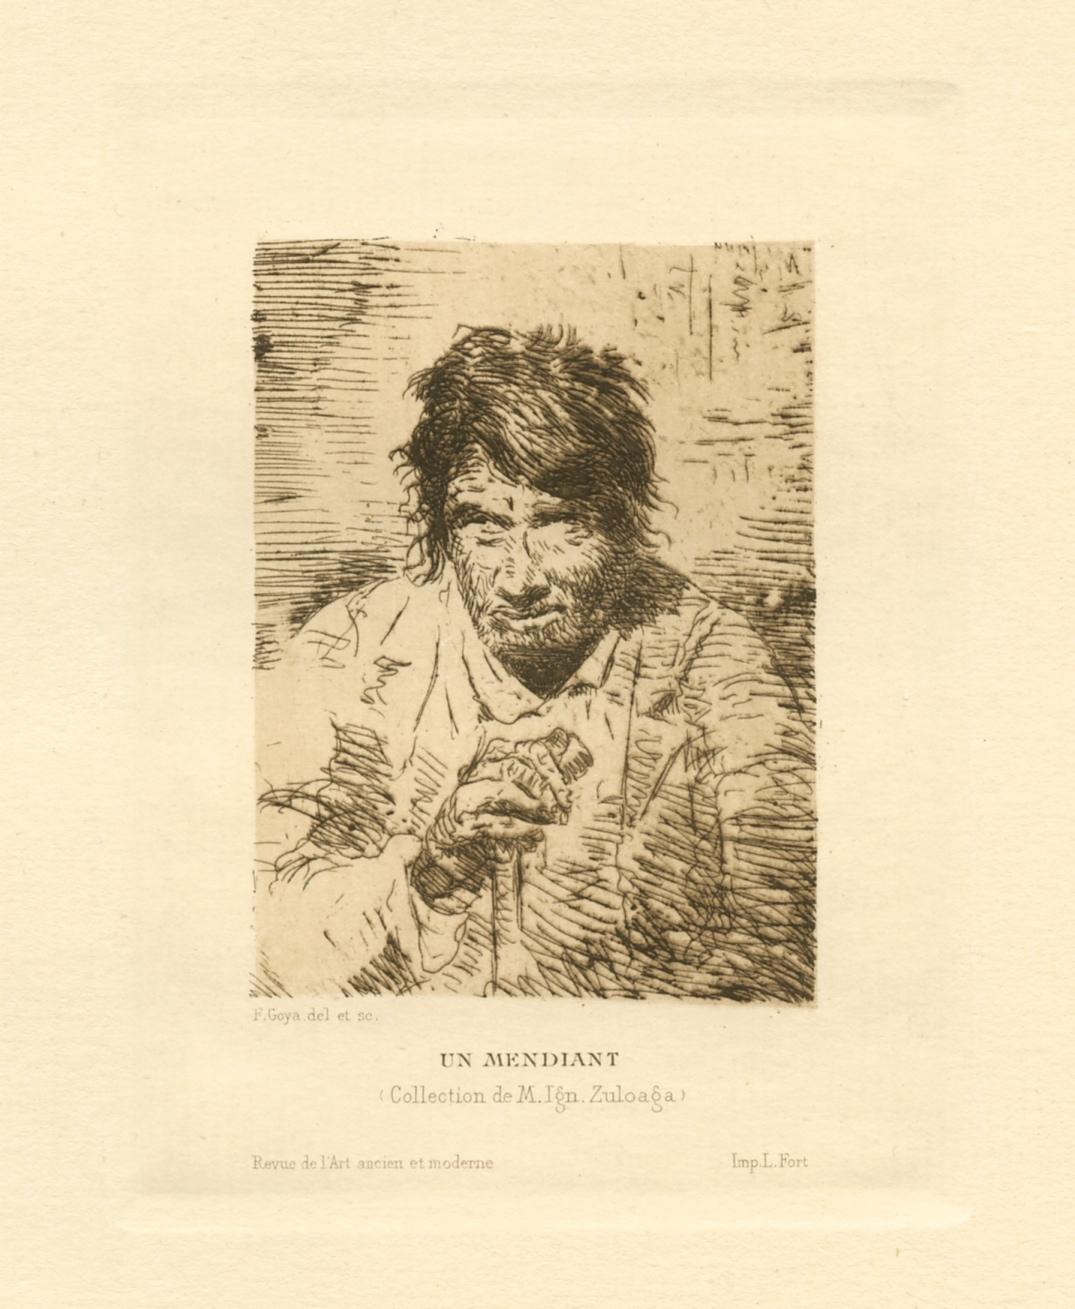 Medium: original etching. This work was printed in 1901 and published by the Revue de l'Art ancien et moderne as an undiscovered Goya etching, but it is now understood to have been executed by Spanish painter Eugenio Lucas. Plate size: 4 3/4 x 3 1/2